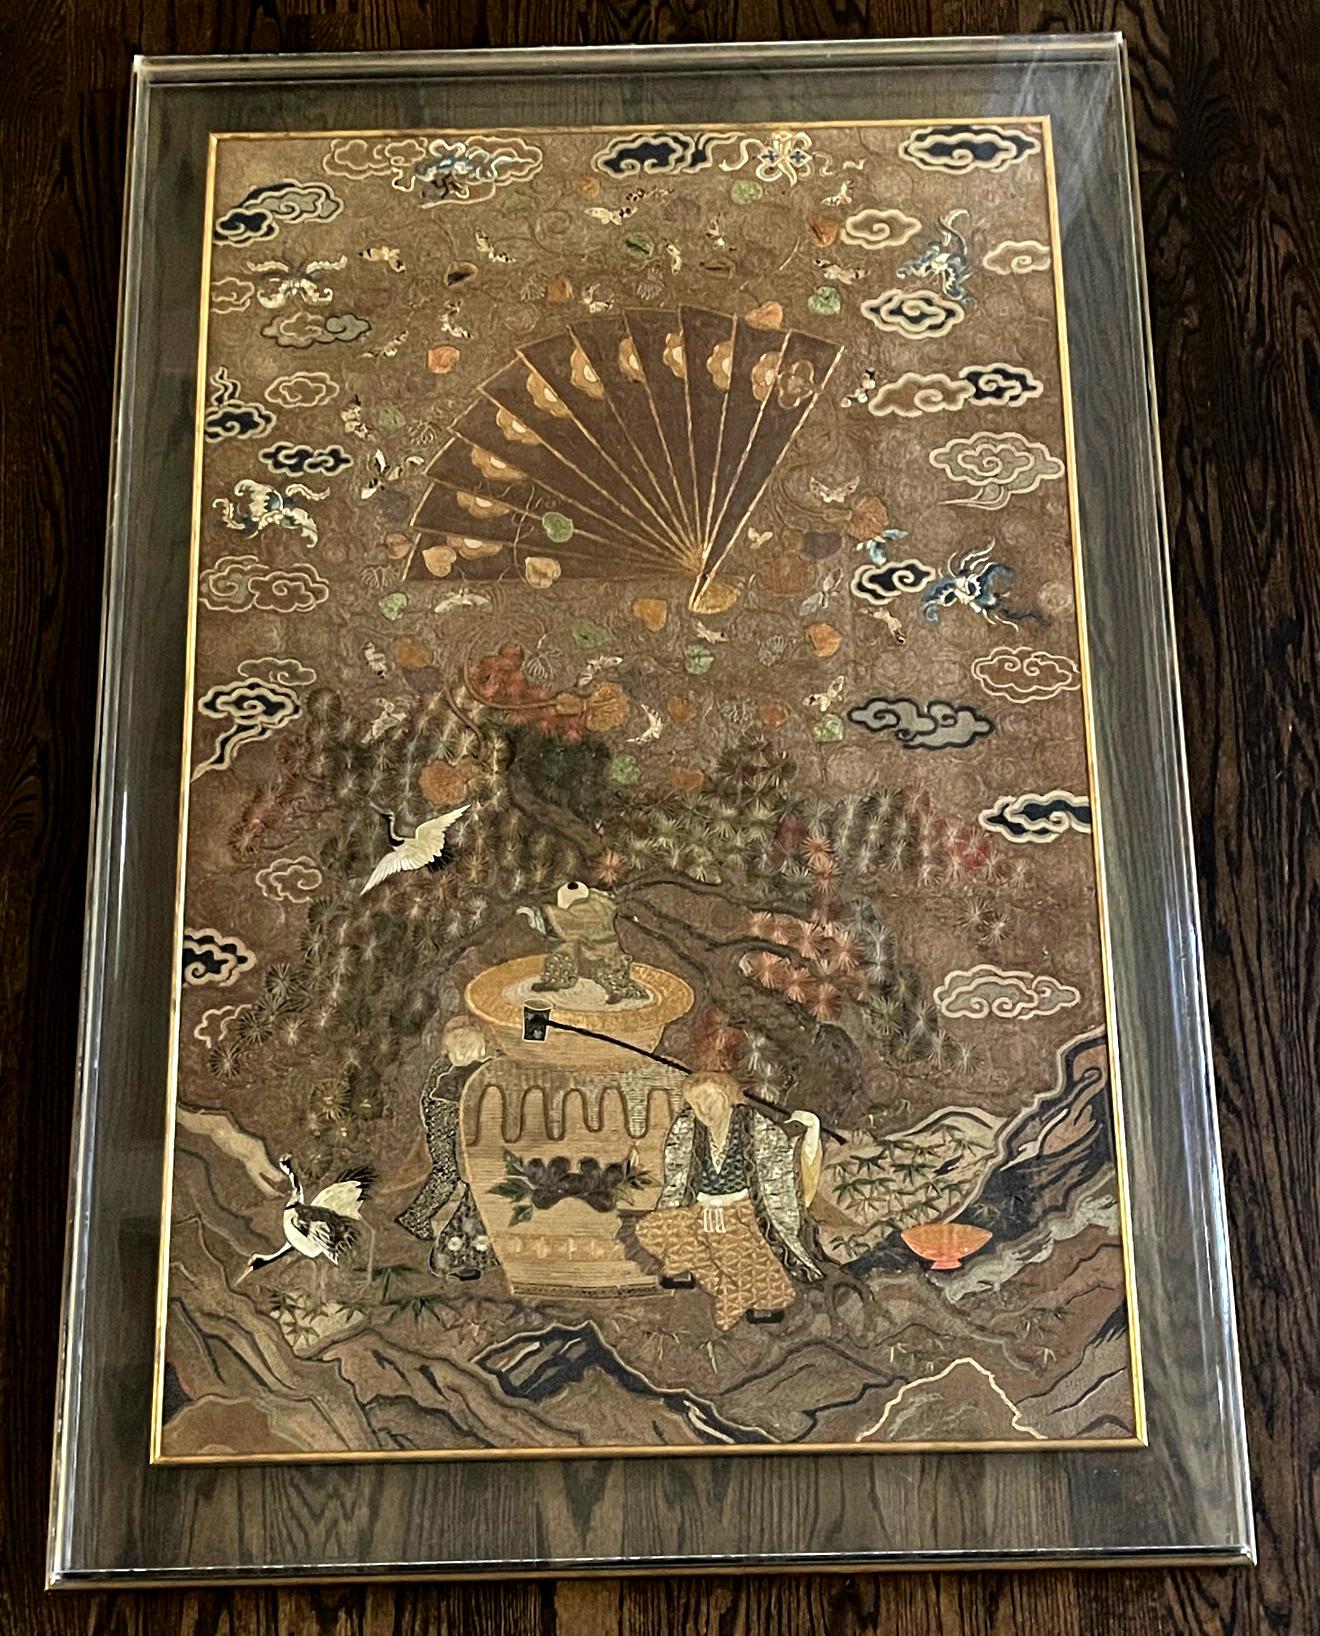 A spectacular Japanese embroidered silk panel beautifully presented in a gilt frame suspended in a lucite shadow box with gilt wood border. The silk picture is dated to 1890-1910s toward the end of Meiji Period, when Japanese started to participate